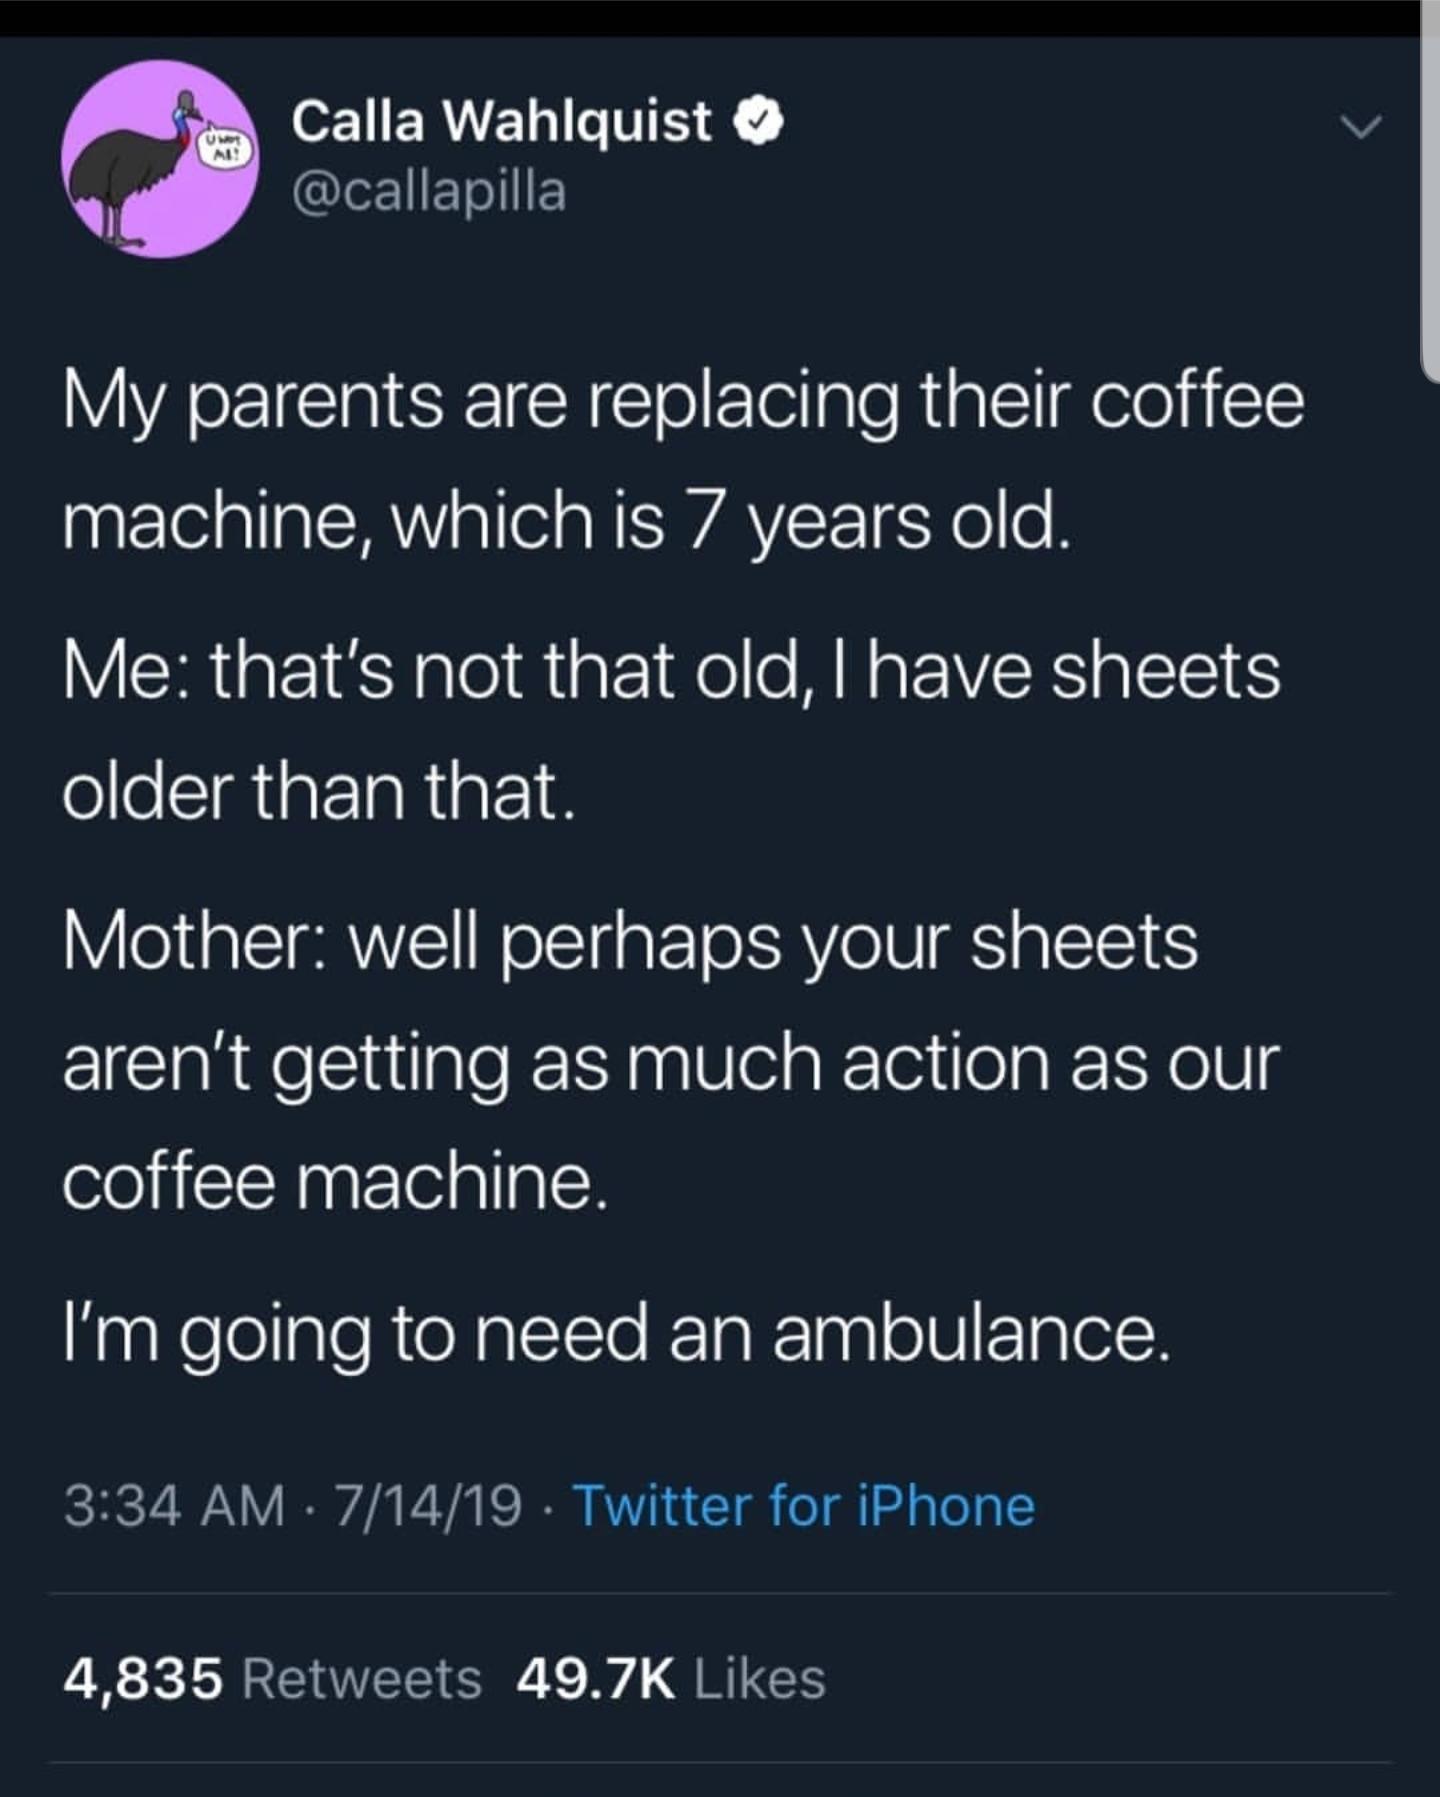 My parents are replacing their coffee machine, which is 7 years old. Me that's not that old, I have sheets older than that. Mother well perhaps your sheets aren't getting as much action as our coffee machine. I'm going to need an…